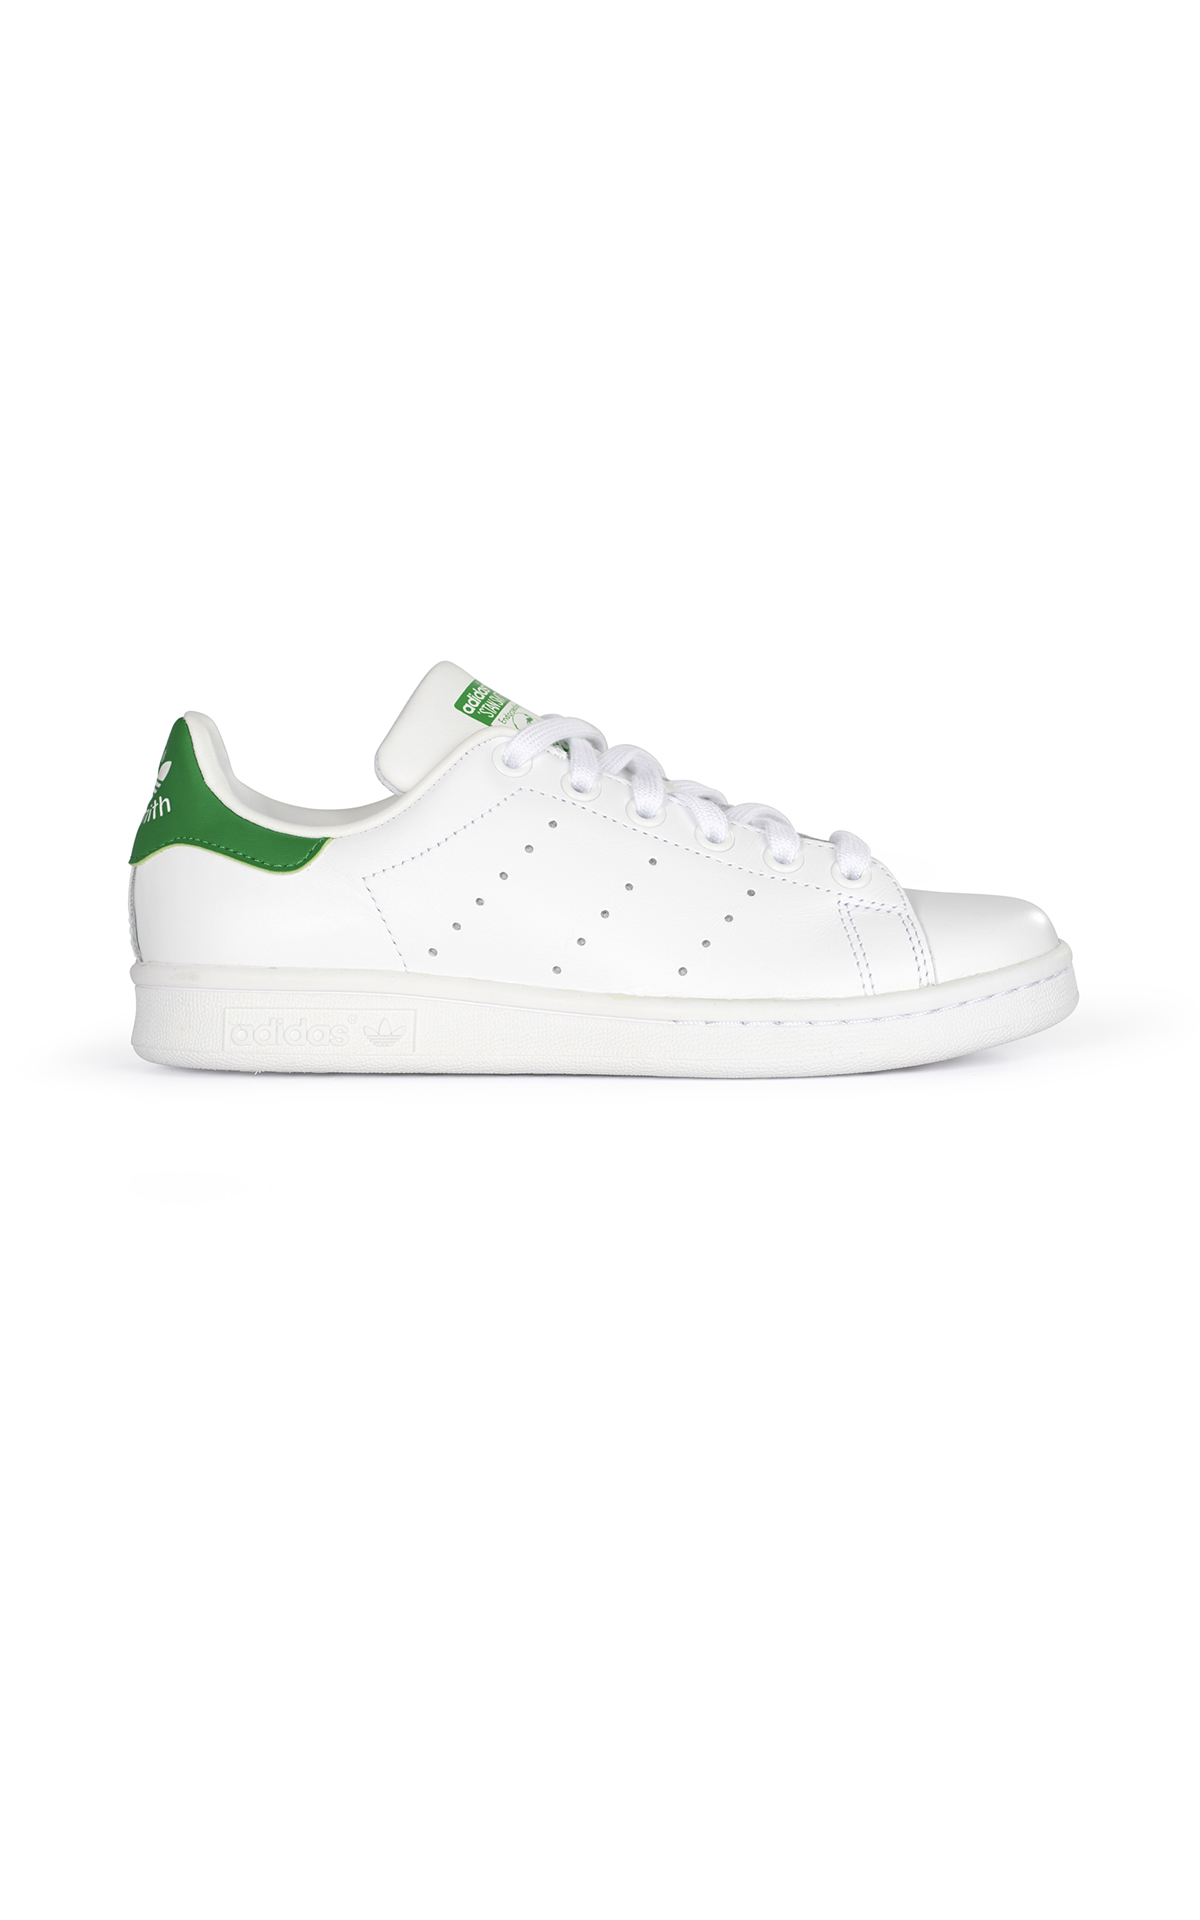 Stan Smith sneakers adidas